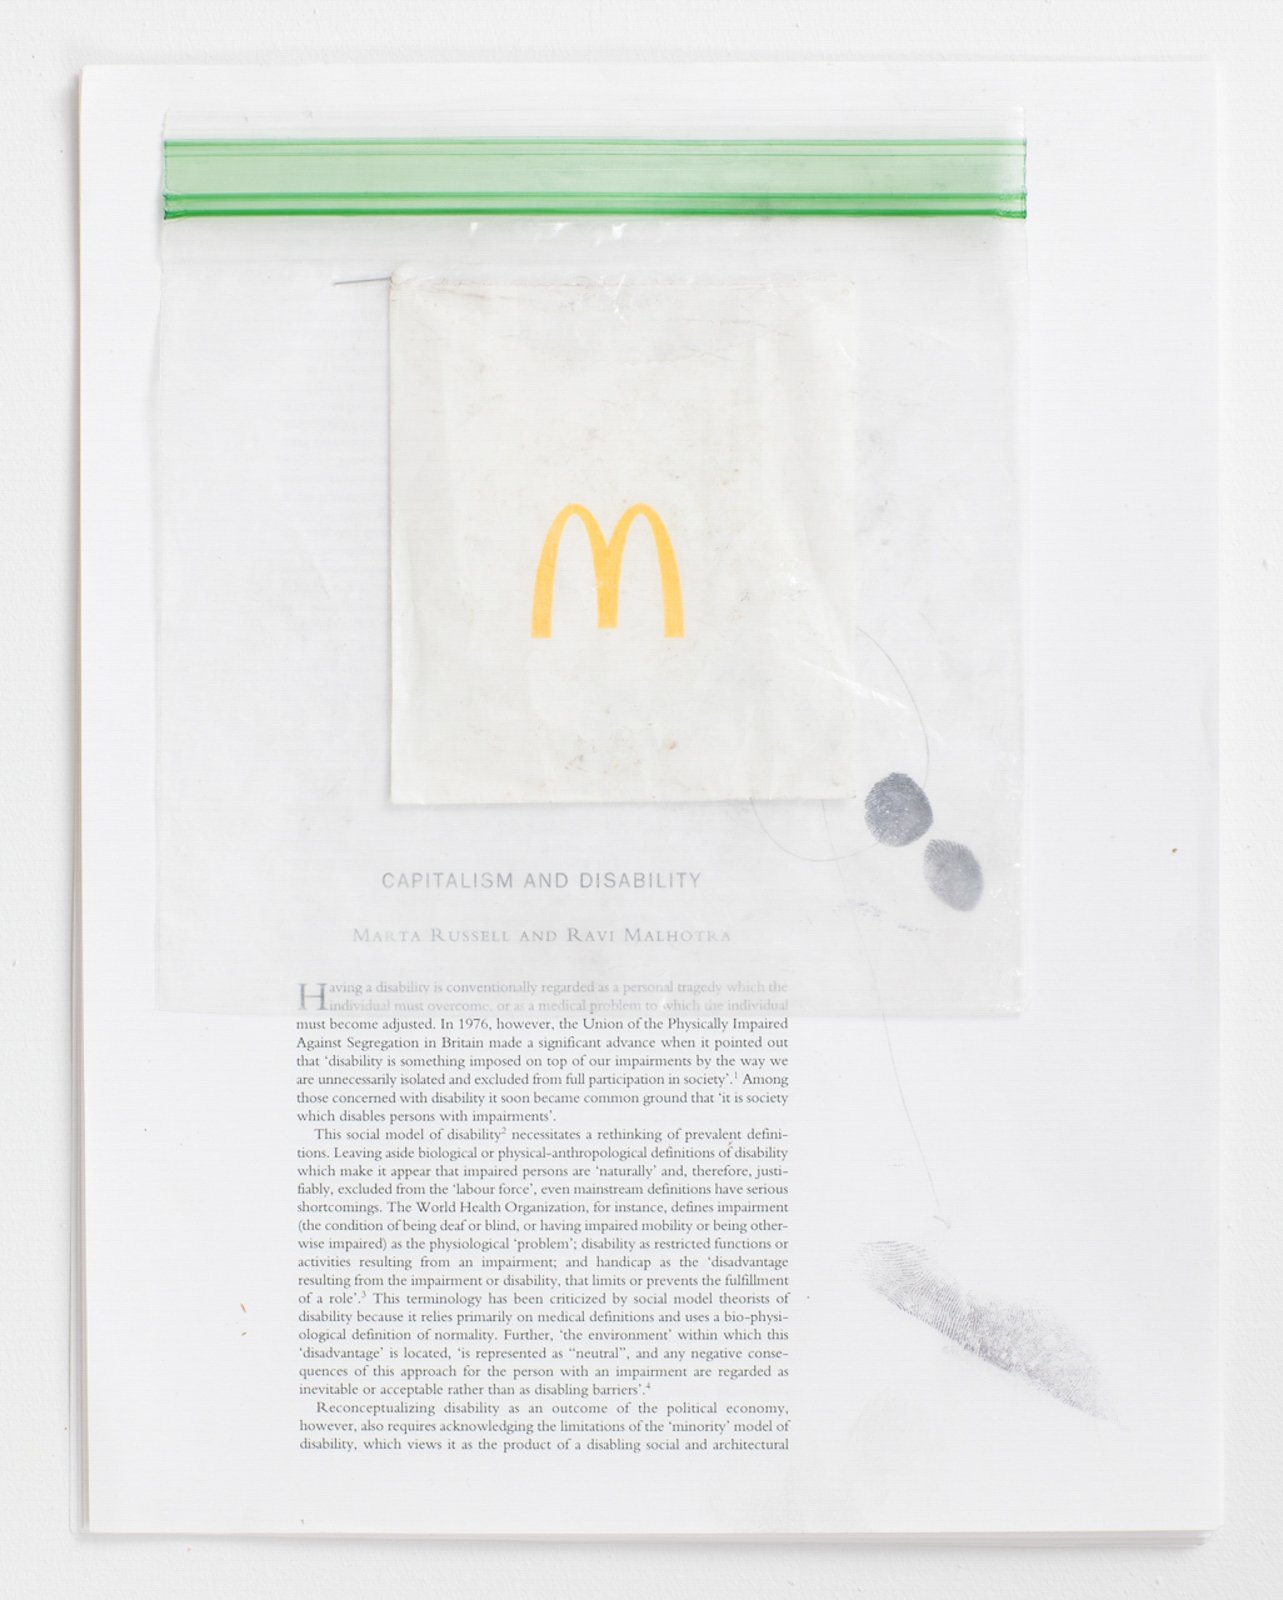   Untitled (Capitalism and Disability),  2017 Text (Capitalism and Disability from the Selected Writings of Marta Russell), Plastic Bag, Found Object, Graphite, Ink, Staple   